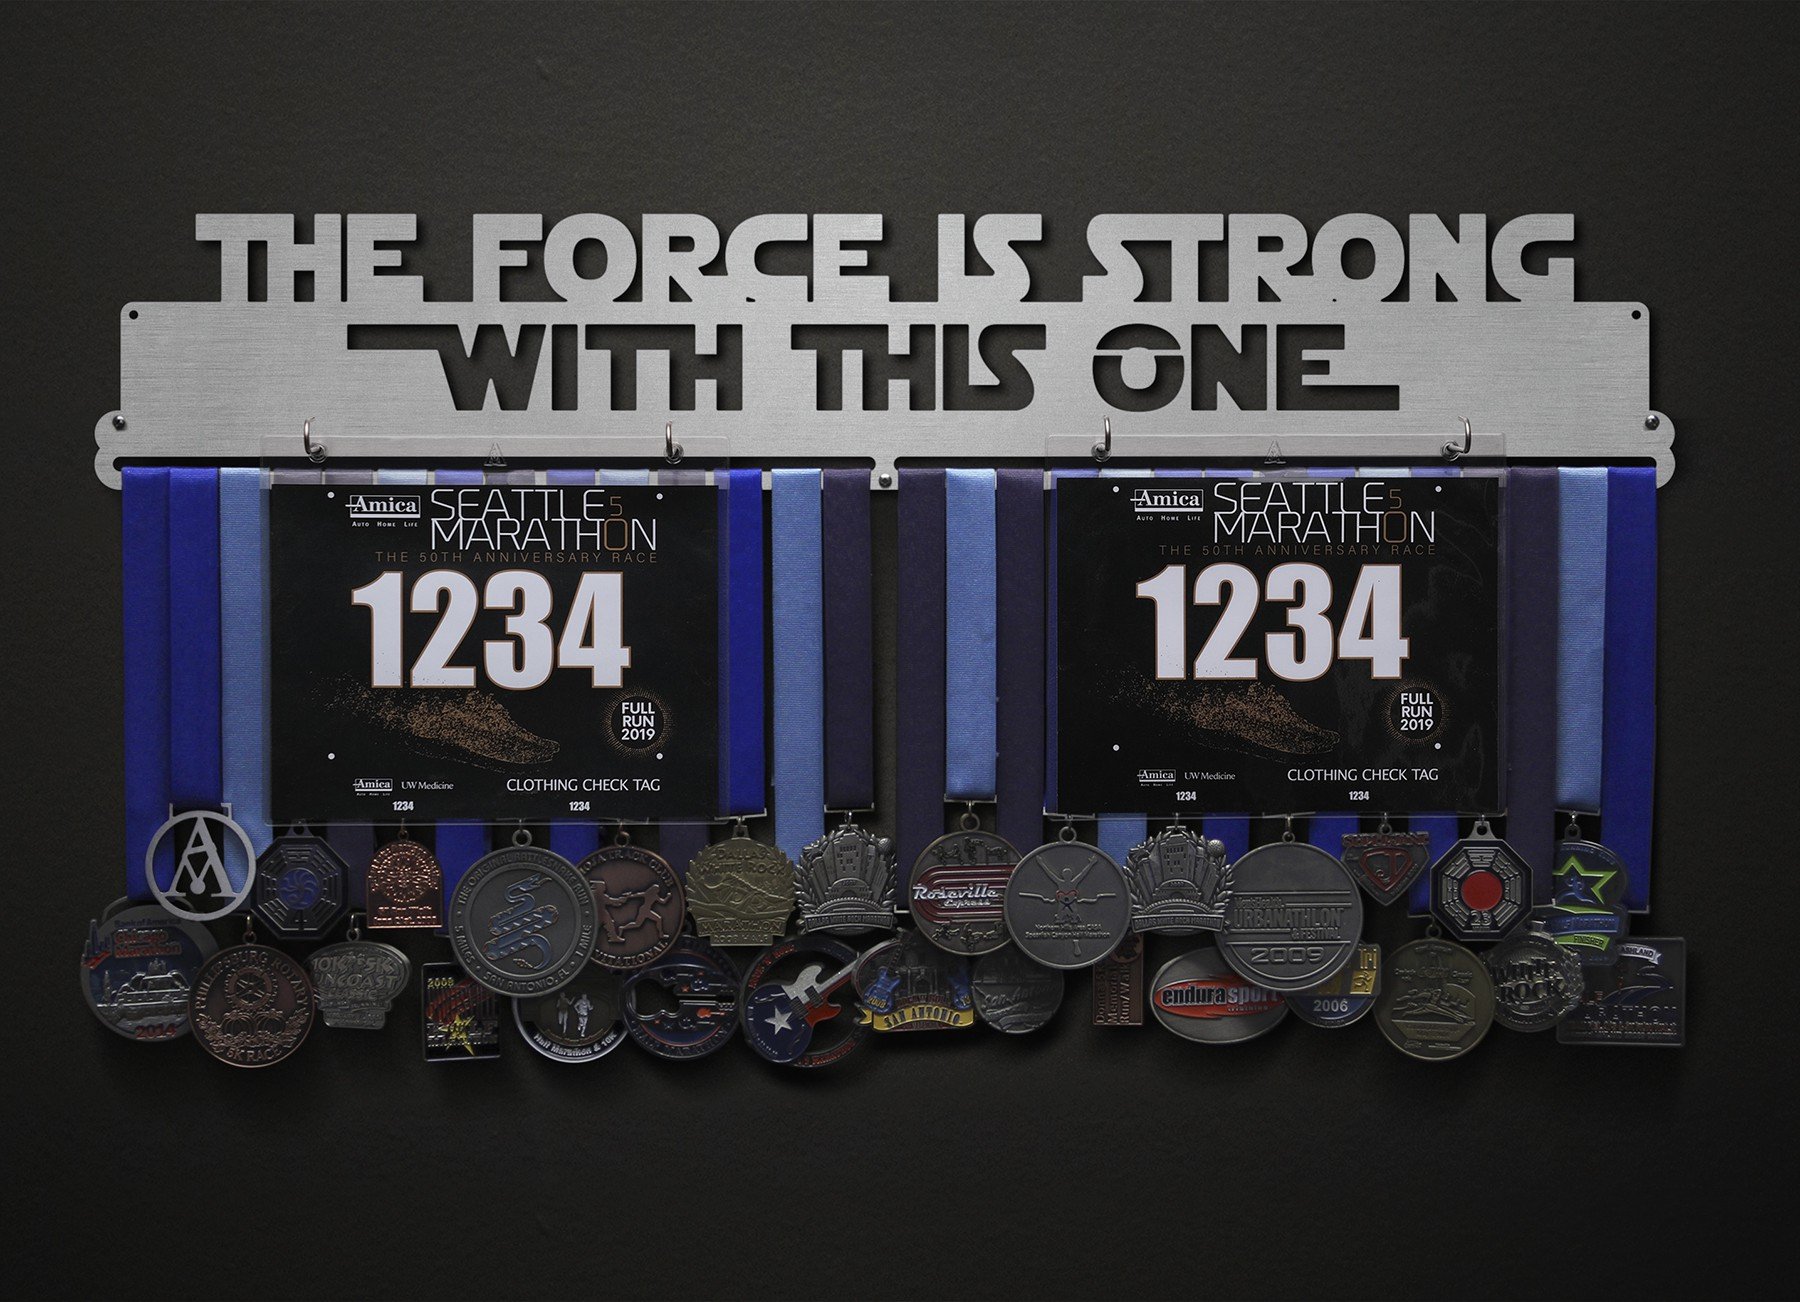 The Force Is Strong With This One Bib and Medal Display